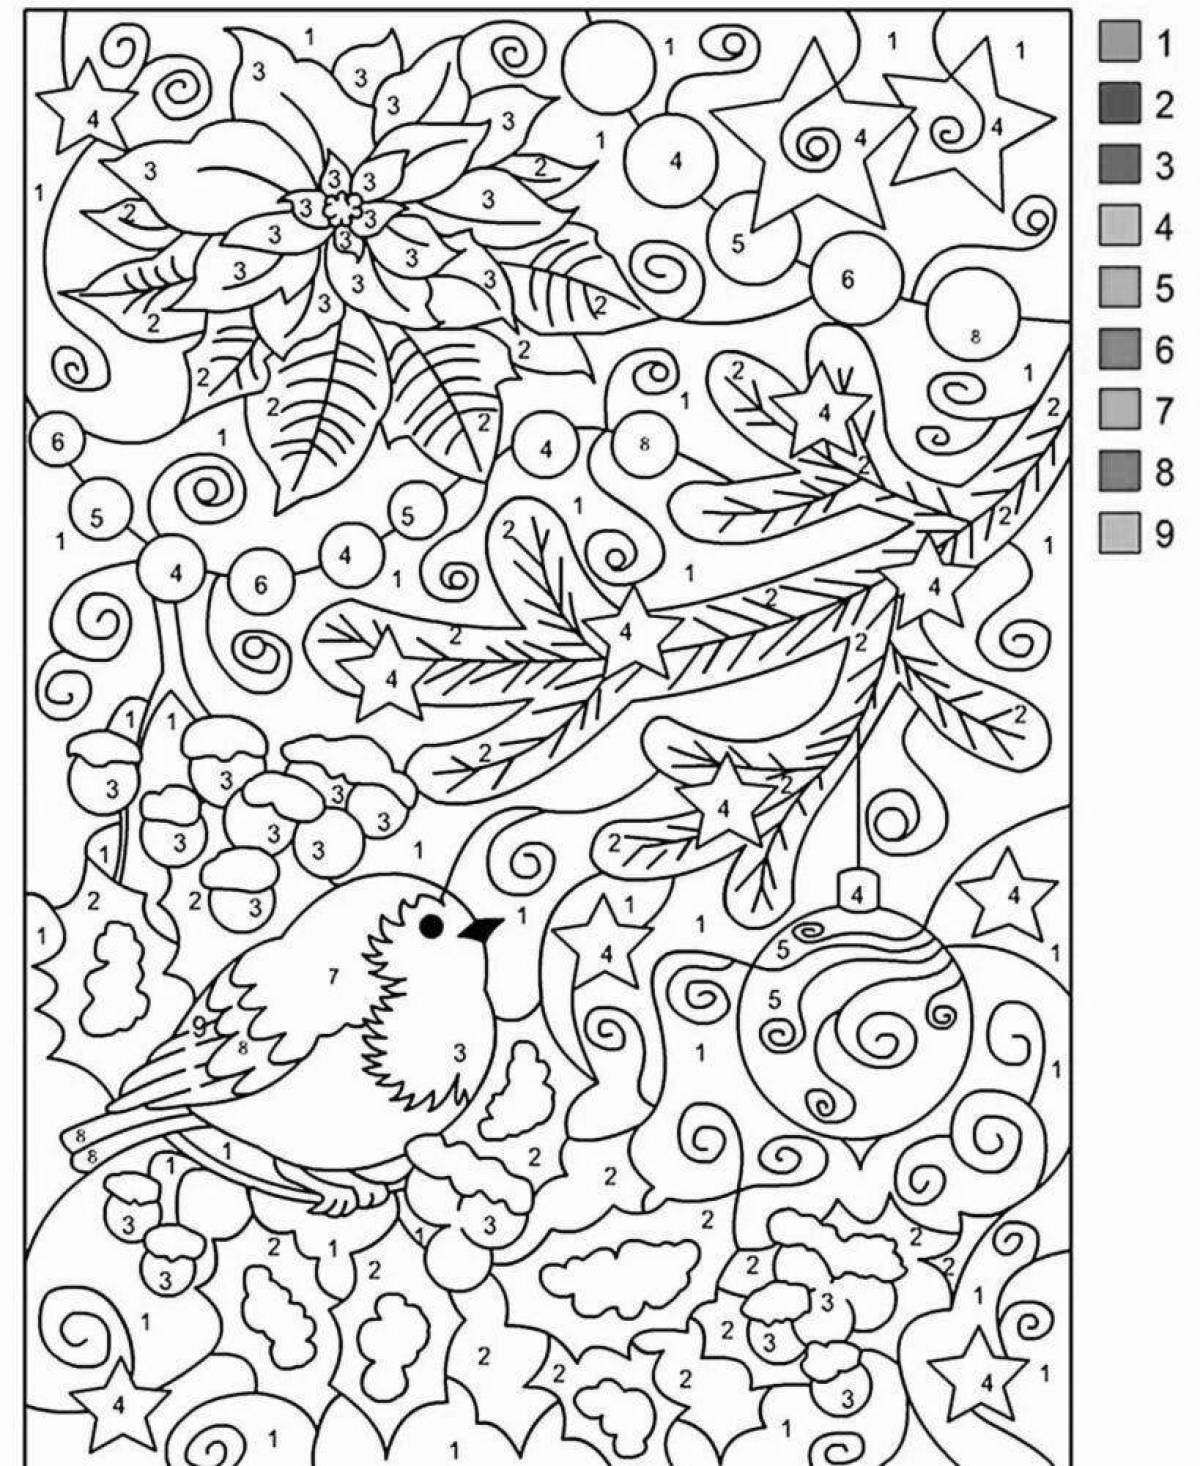 Blissful anti-stress coloring by numbers